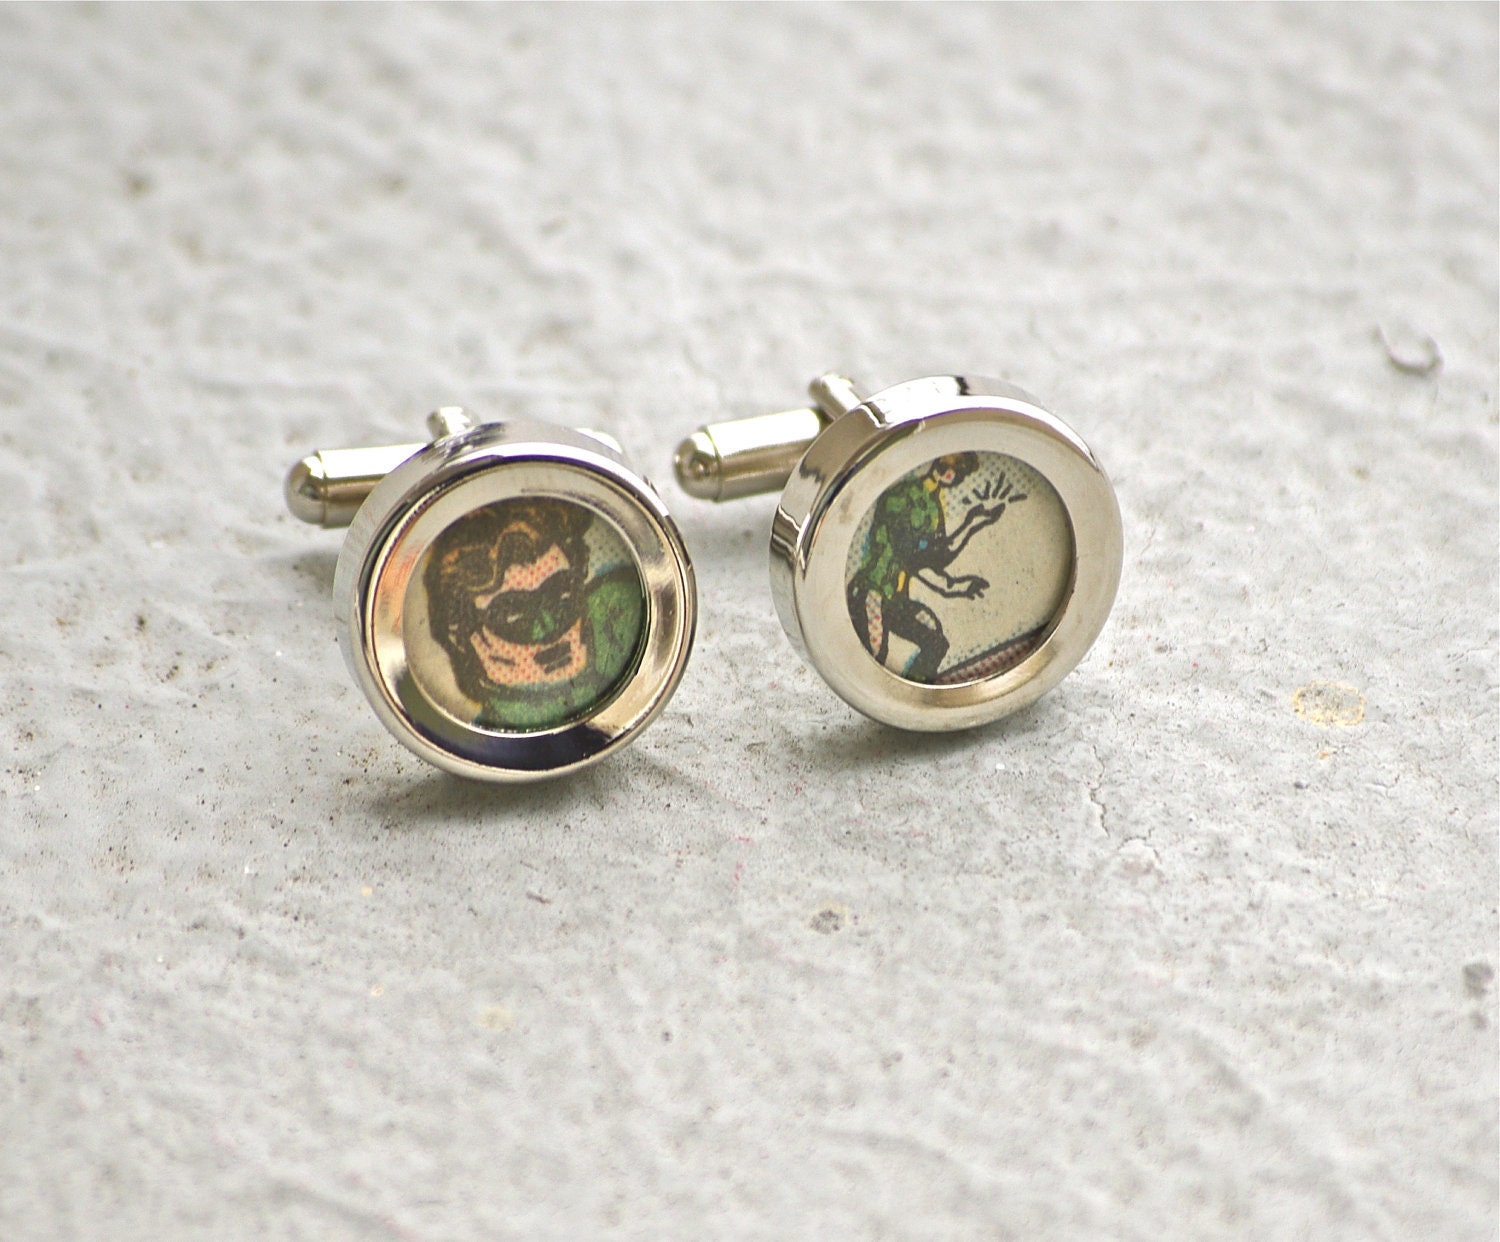 The Green Lantern Cuff Links Cufflinks recycled handmade comic book upcycled vintage rare dc comics superhero geeky accessories - SUPERSOCK